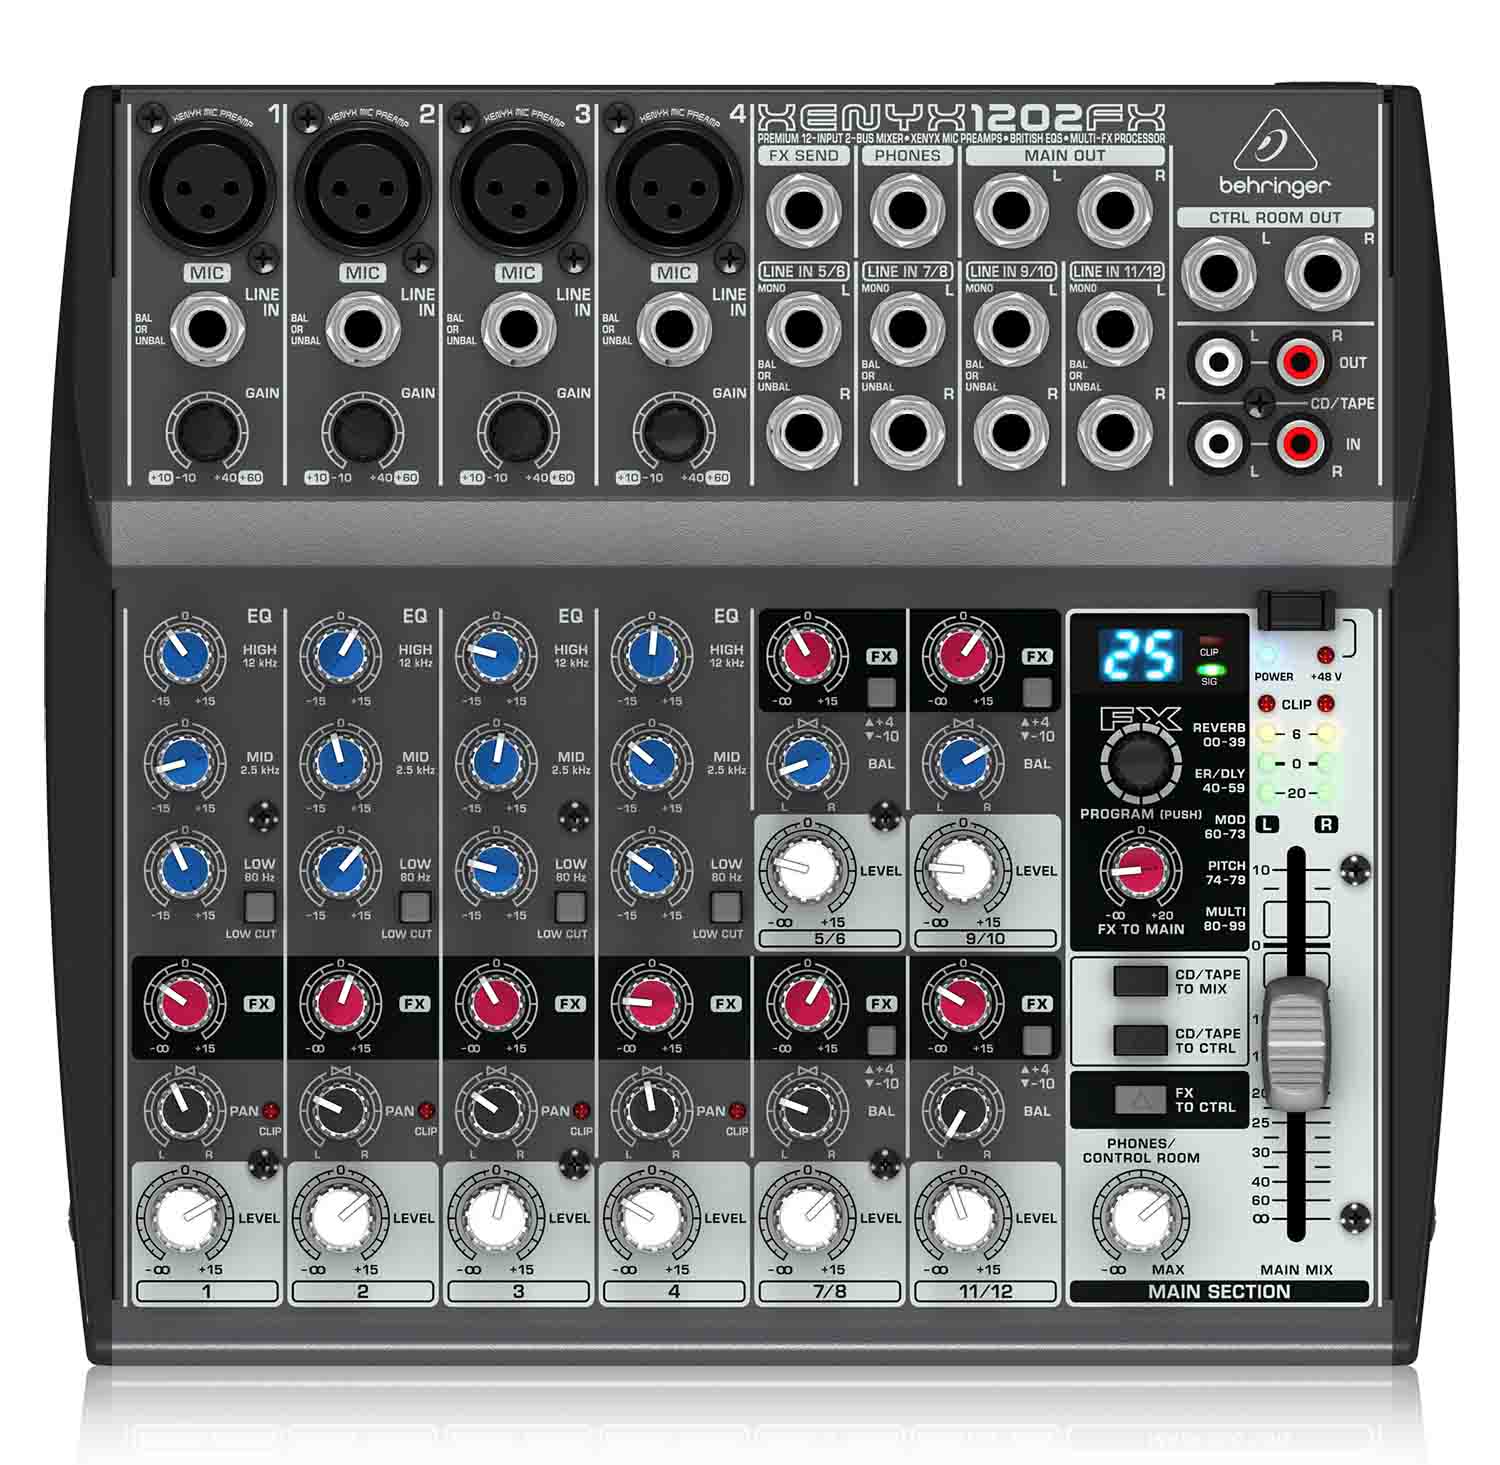 B-Stock: Behringer Xenyx 1202 FX, Premium 12-Input 2-Bus Mixer with XENYX Mic Preamps - Hollywood DJ